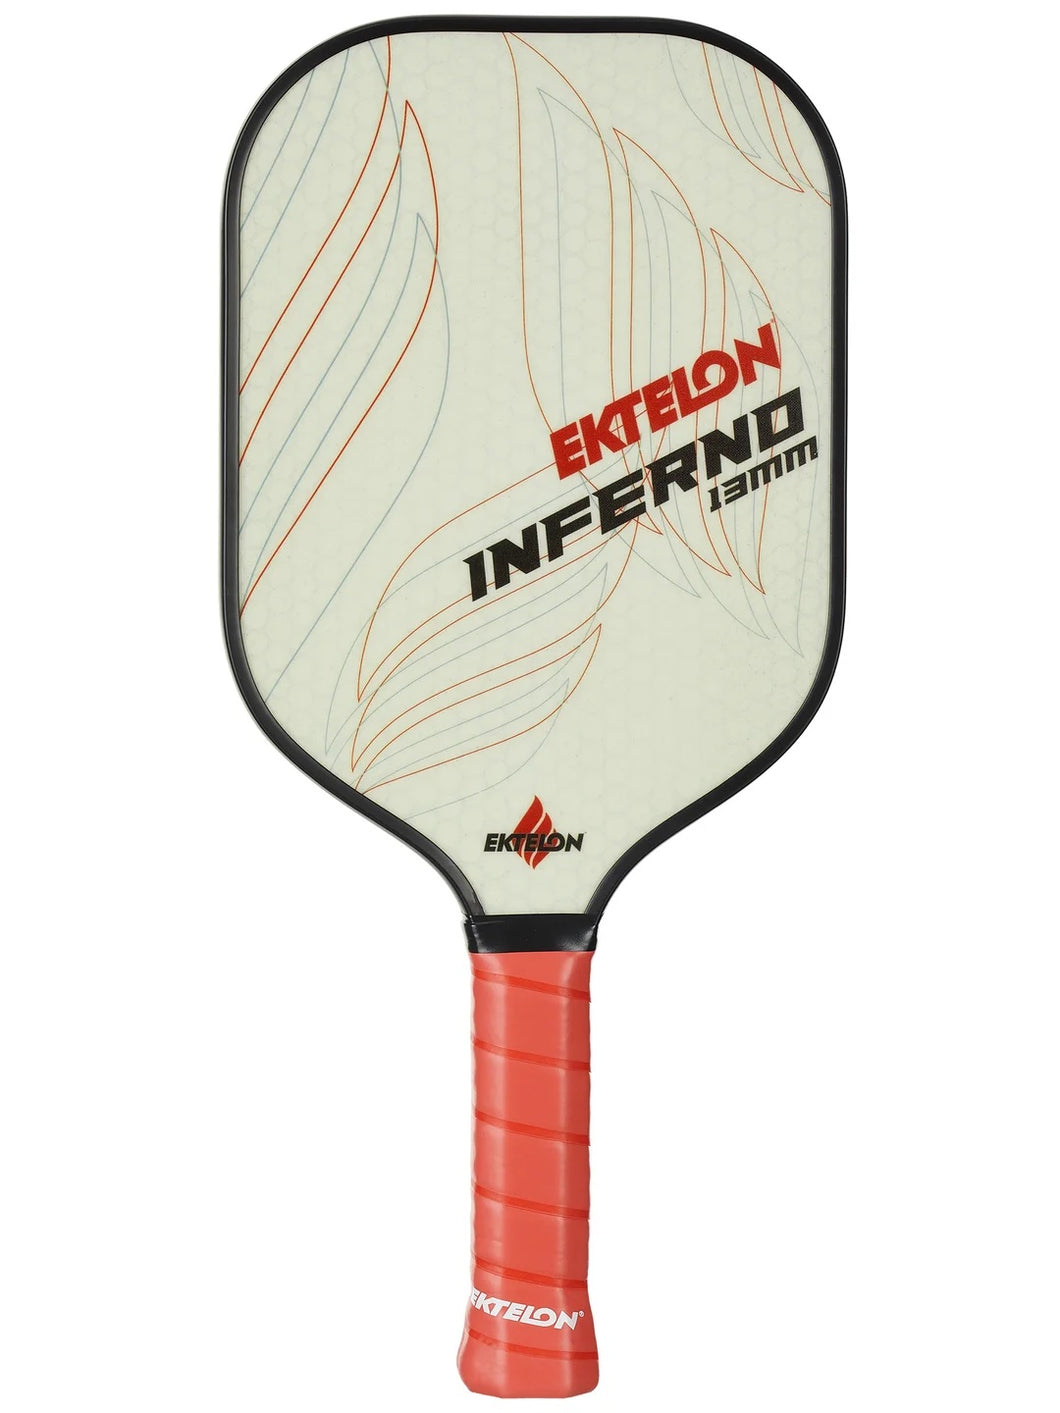 Well known in the racquetball industry, Ektelon now sparks a blaze in the pickleball world with the Ektelon Inferno 13mm Pickleball Paddle. 